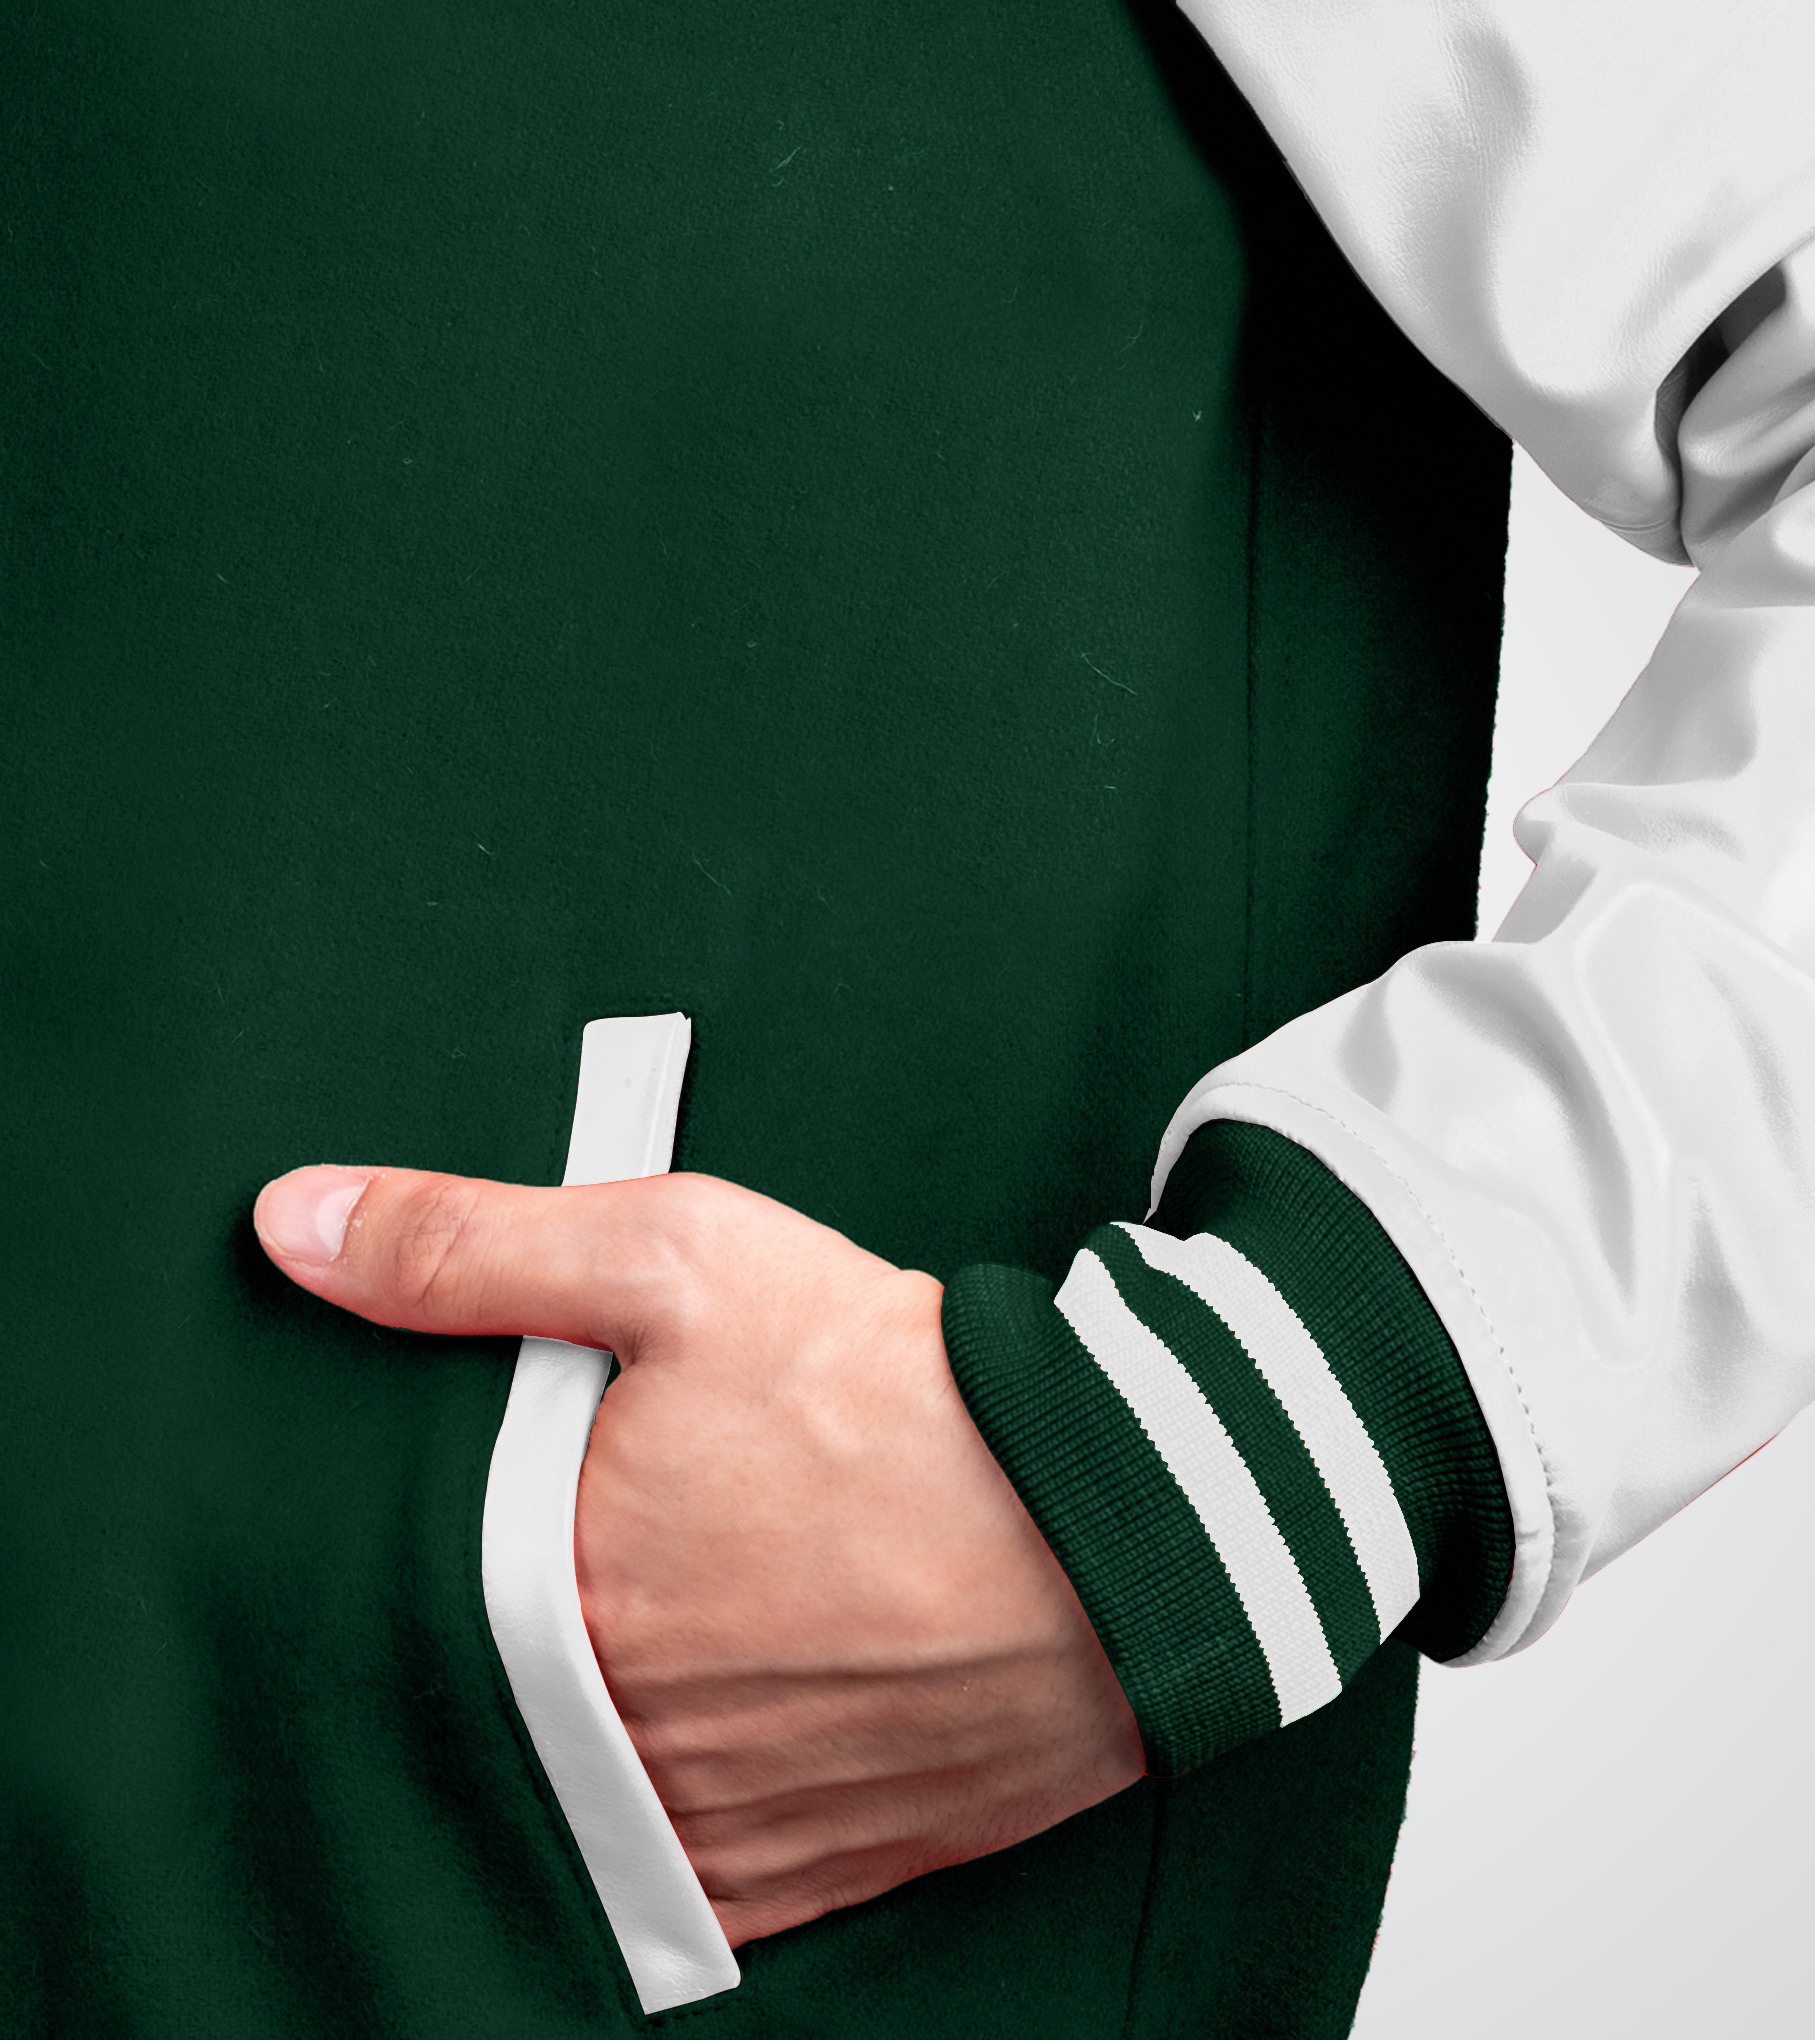 Forest Green wool body and White leather sleeves Varsity Jacket